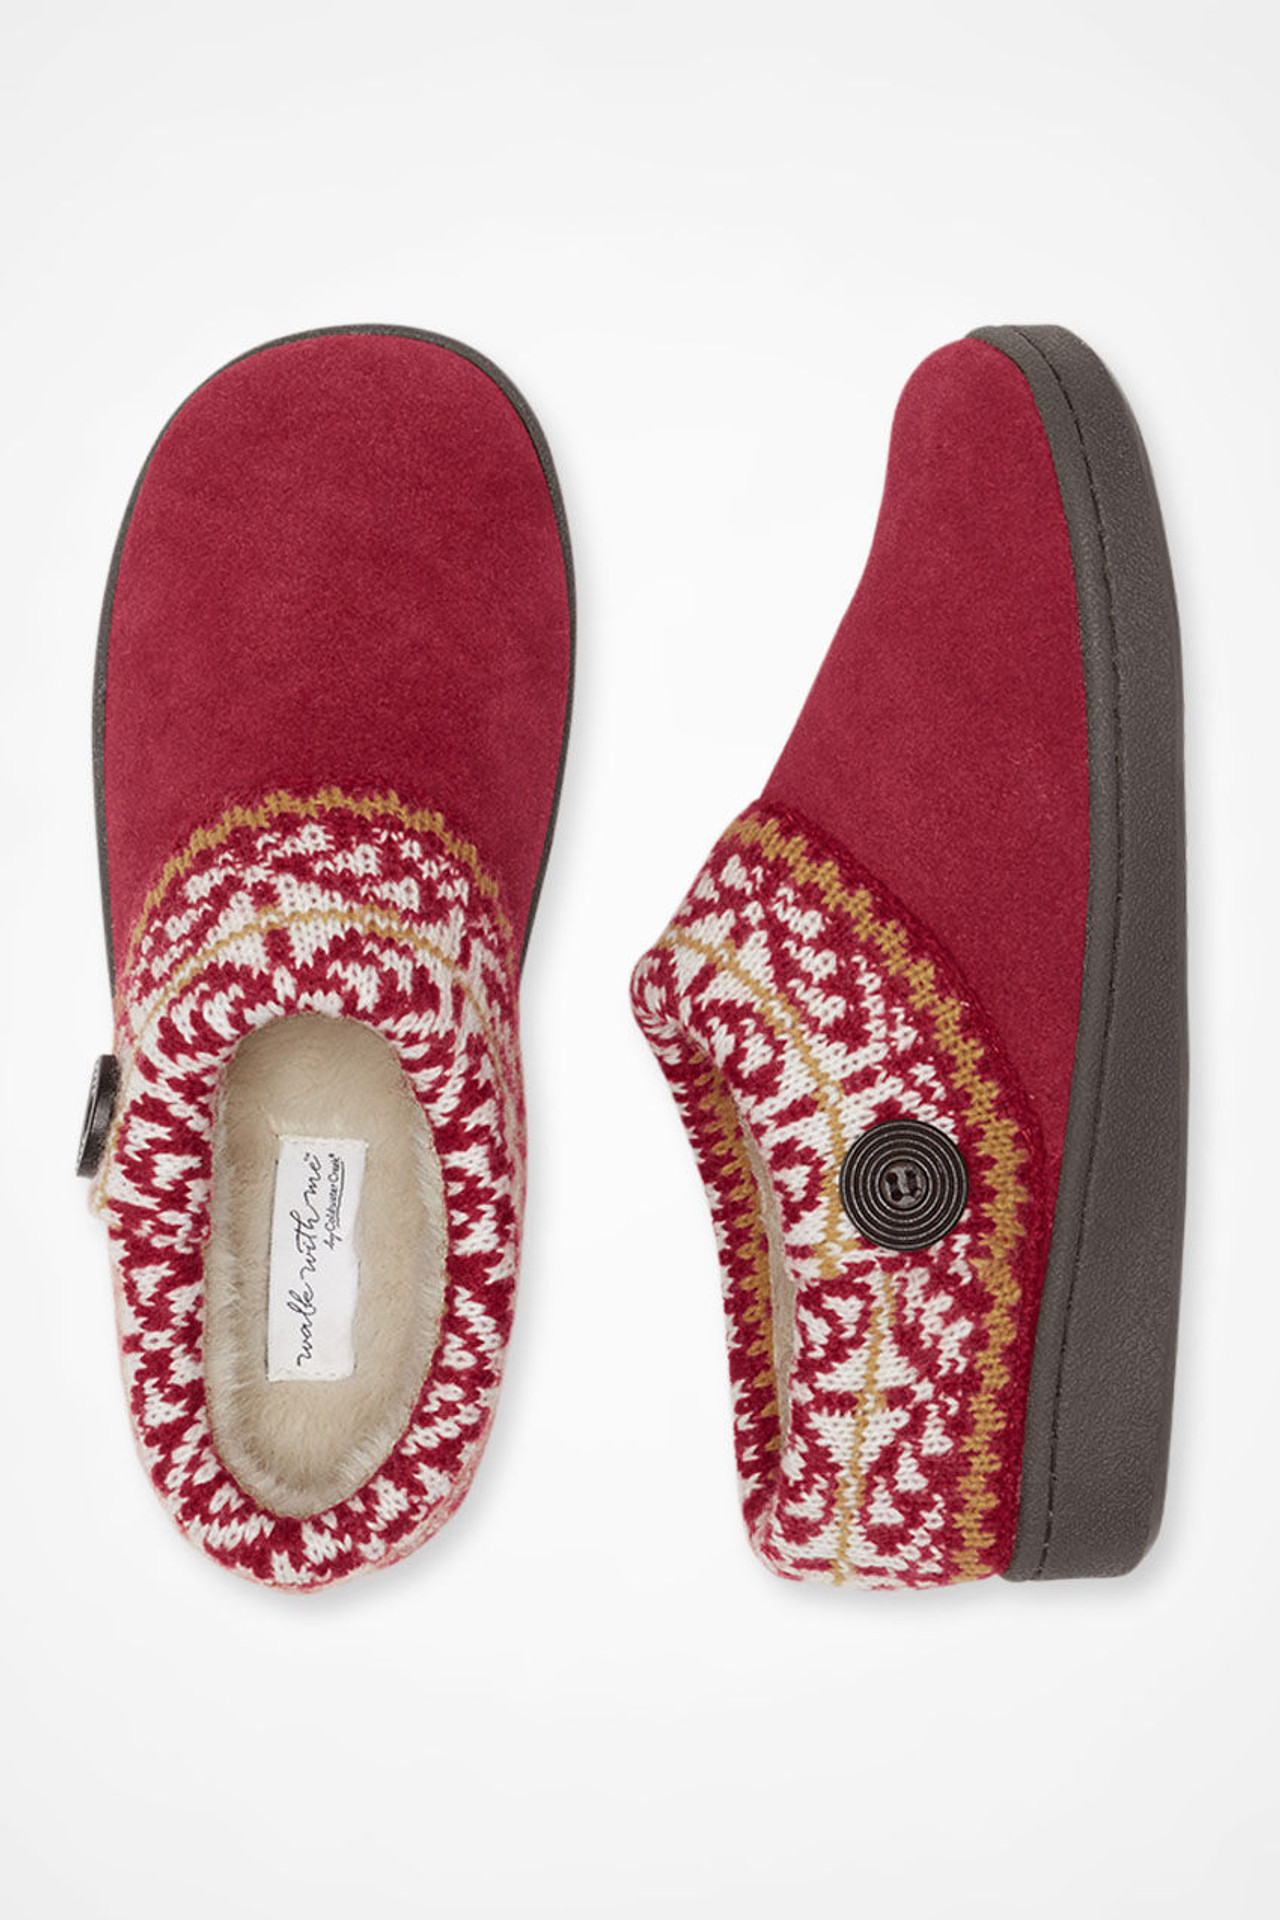 "Mountainside" Slippers by Walk With Me™